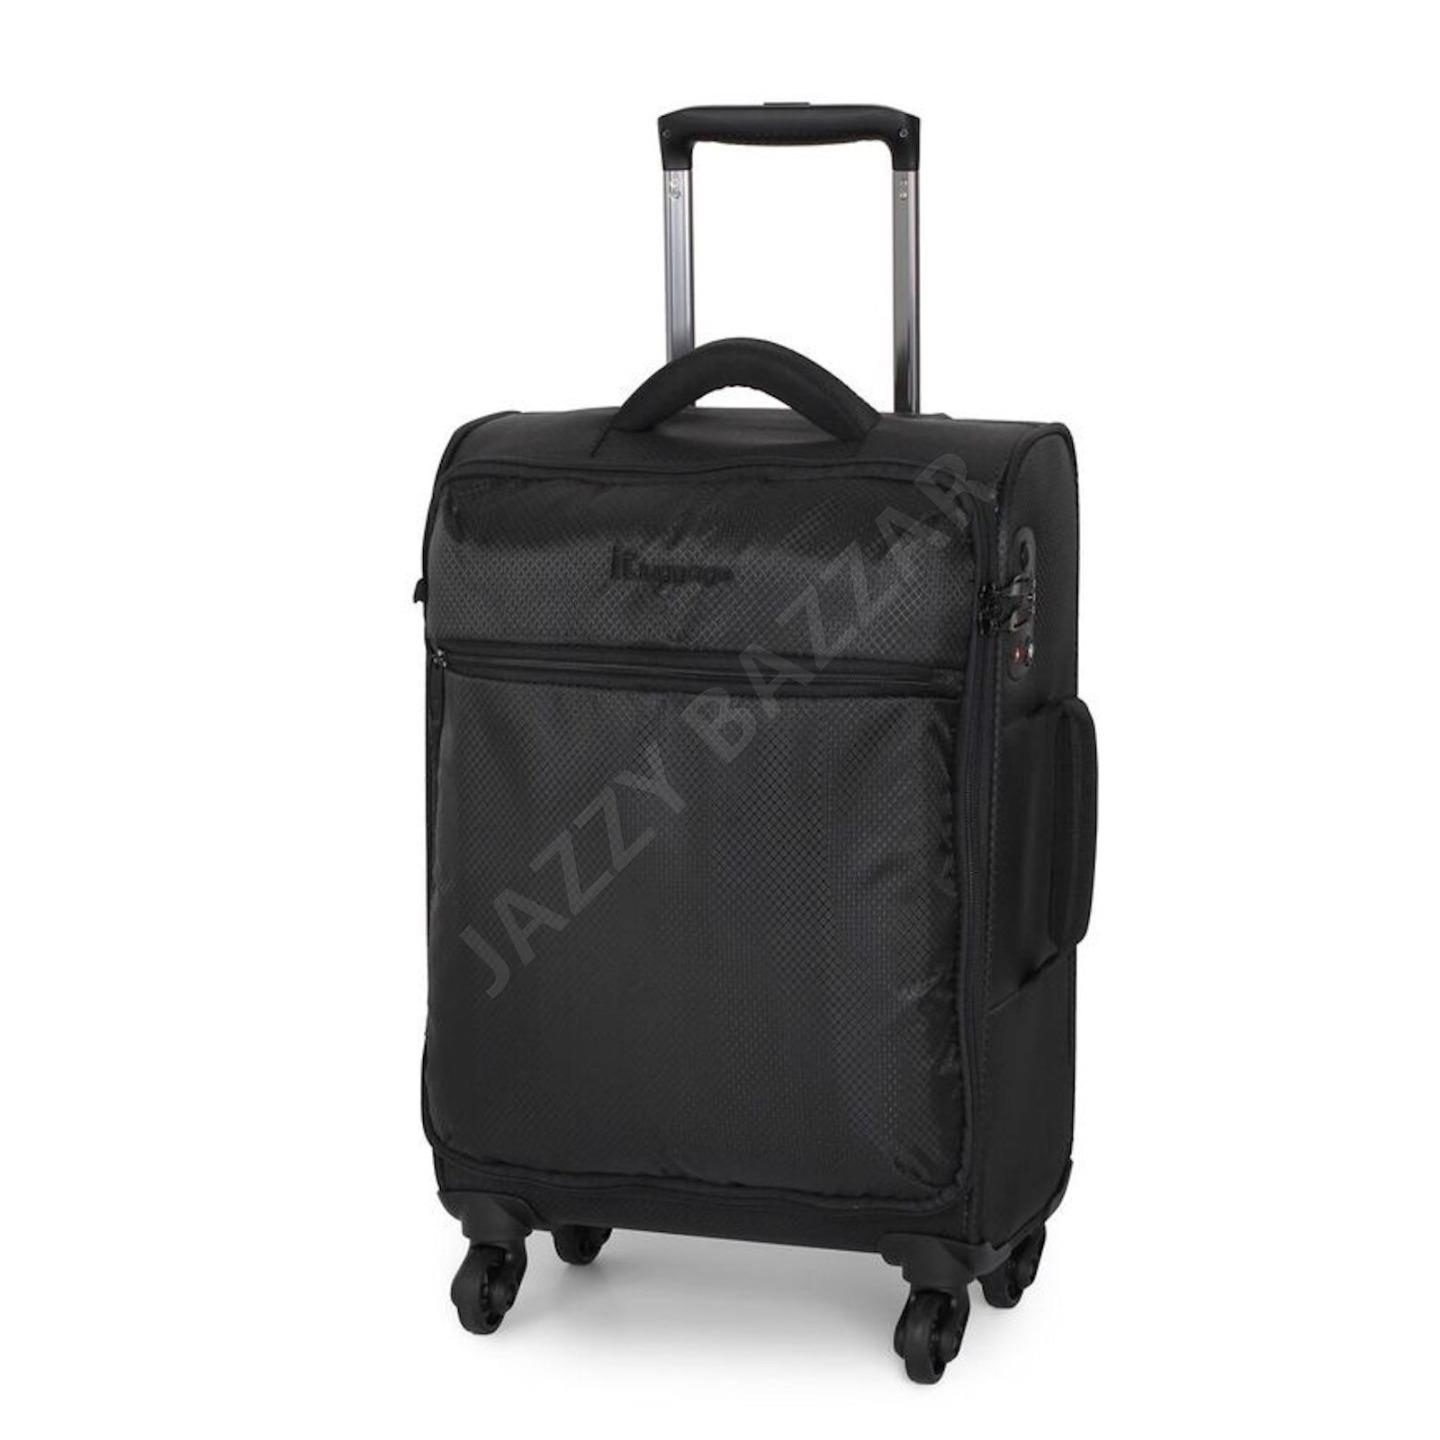 IT Luggage The LITE Carry On Luggage Trolley Spinner 4 Wheel Cabin Suitcase bag | eBay